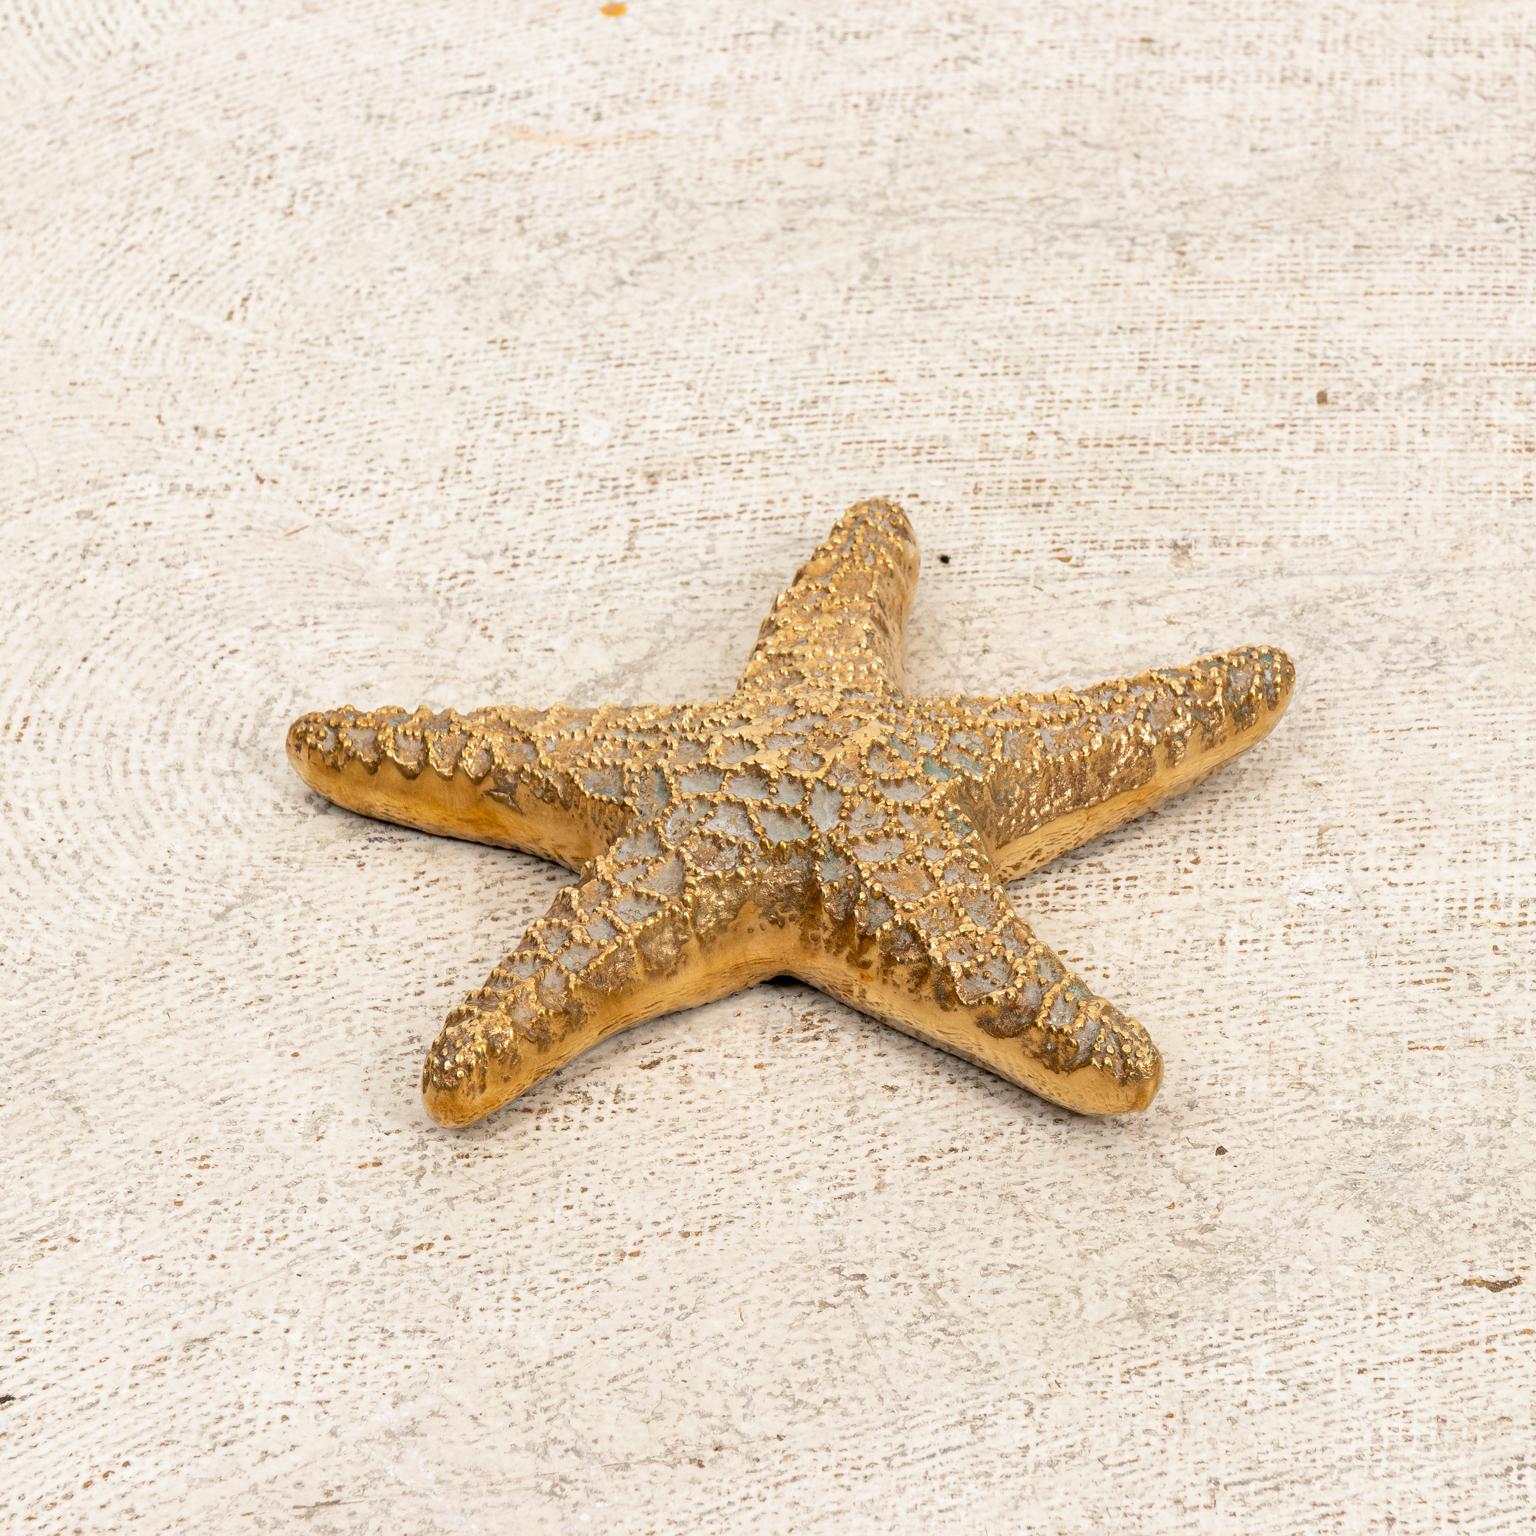 Circa 1960-1970s Hollywood Regency style brass starfish, hand polished and very detailed. Made in the United States. Please note of wear consistent with age.